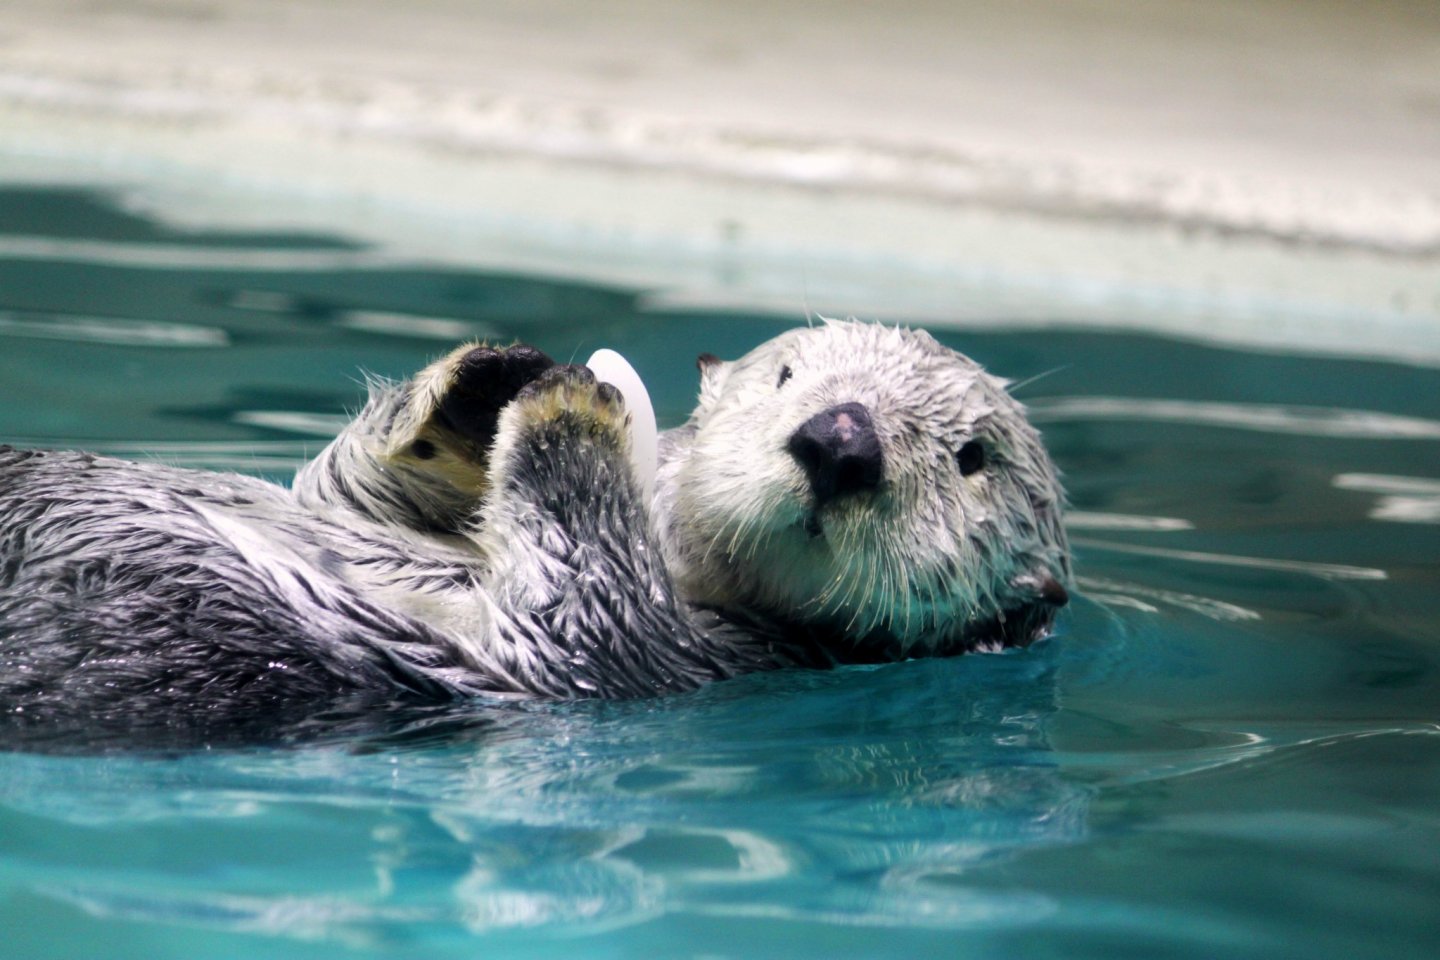 I was really looking forward to meeting the sea otter!